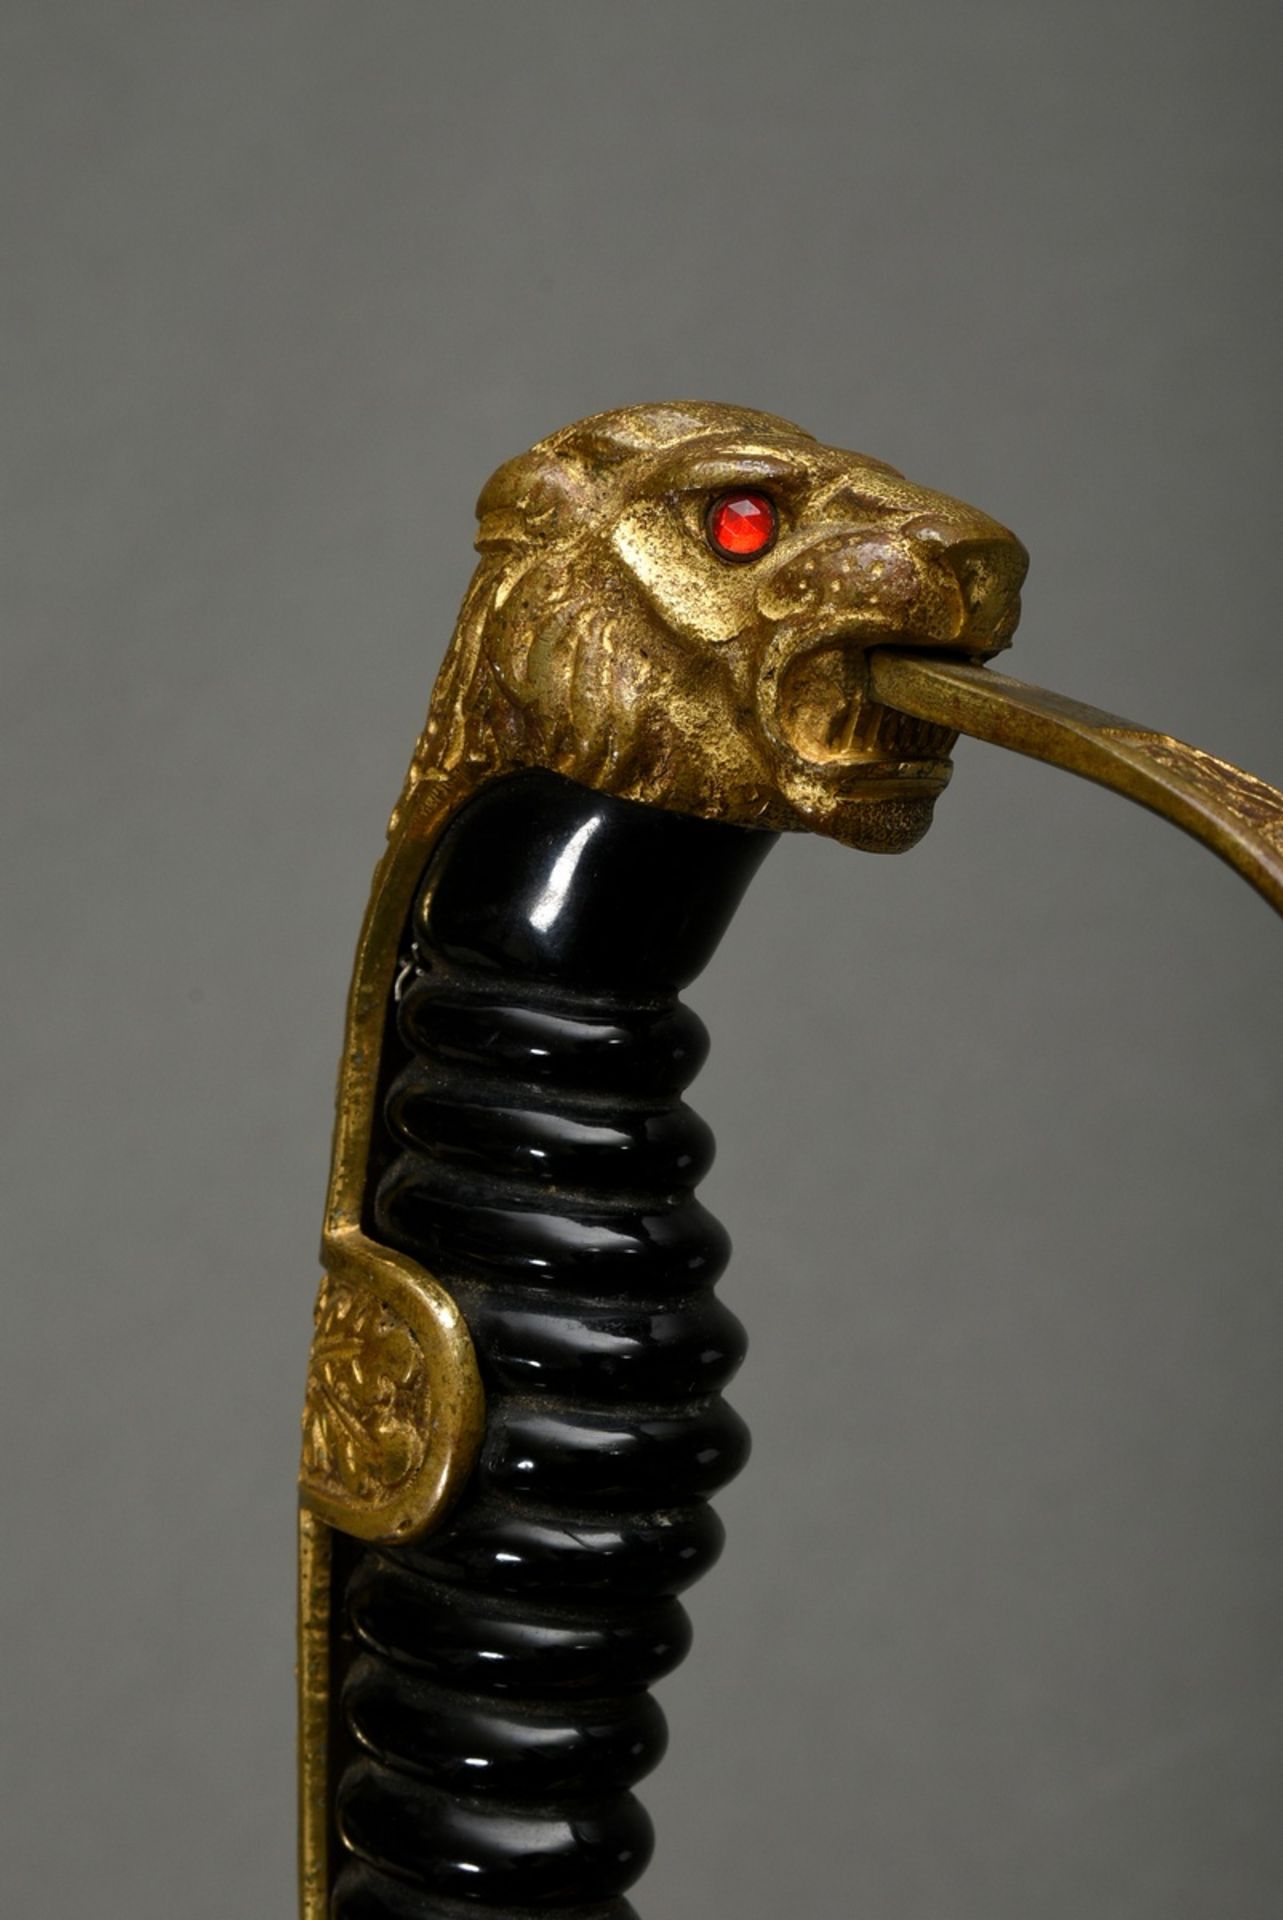 Wehrmacht officers lion head sabre with oak leaf decorations, bakkelite grip and red glass eyes, WK - Image 4 of 6